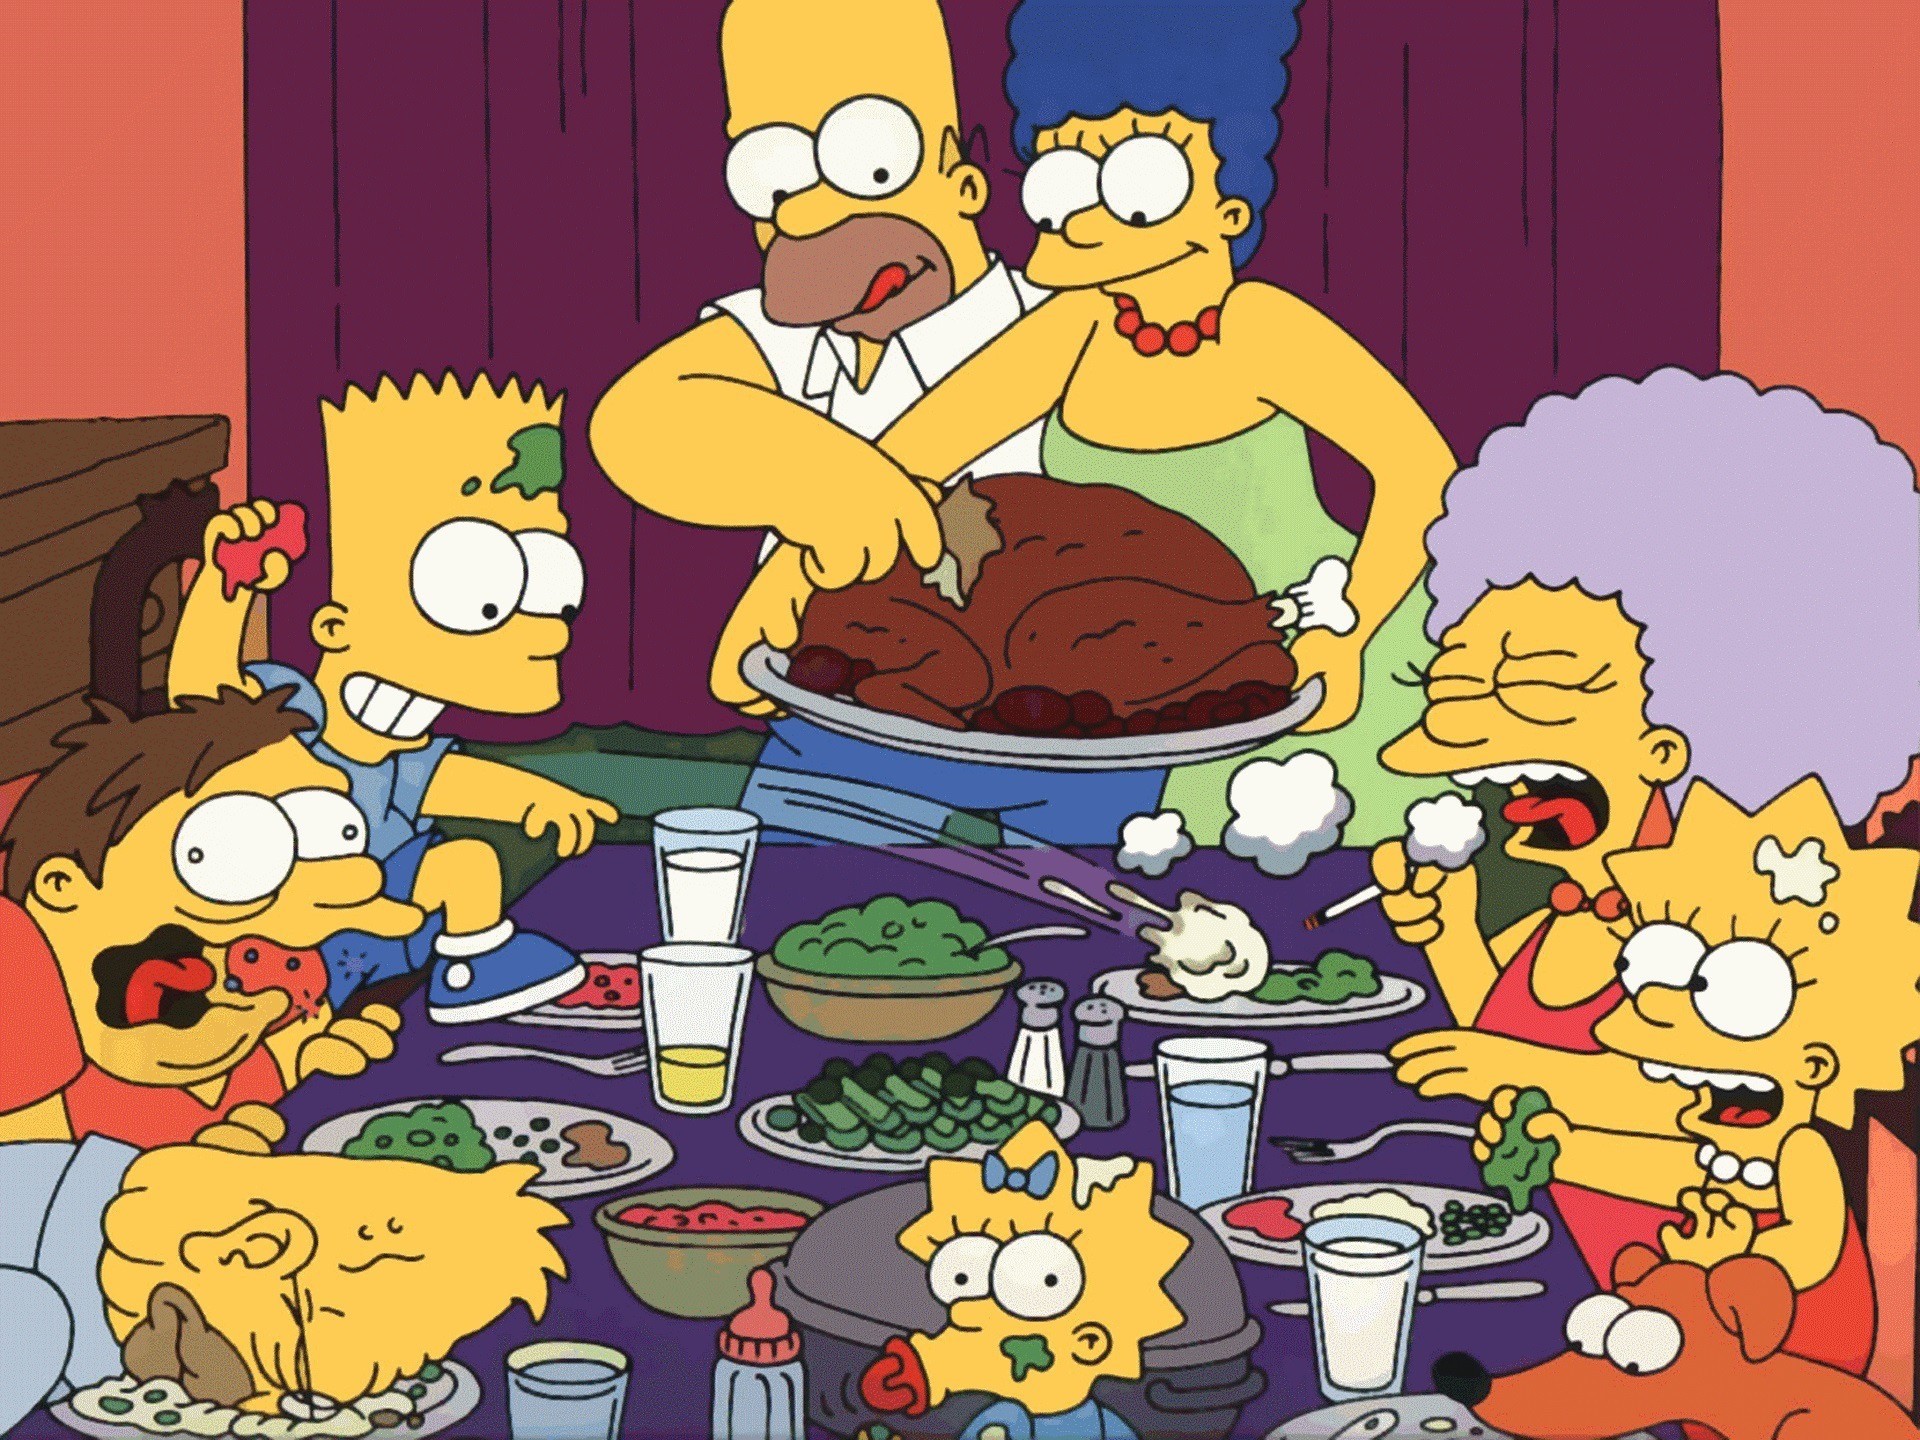 1920x1440  Thanksgiving Meal, Disney Thanksgiving, Funny Thanksgiving  Pictures, Thanksgiving Wallpaper, Thanksgiving Greetings, Family  Gatherings, Funny ...